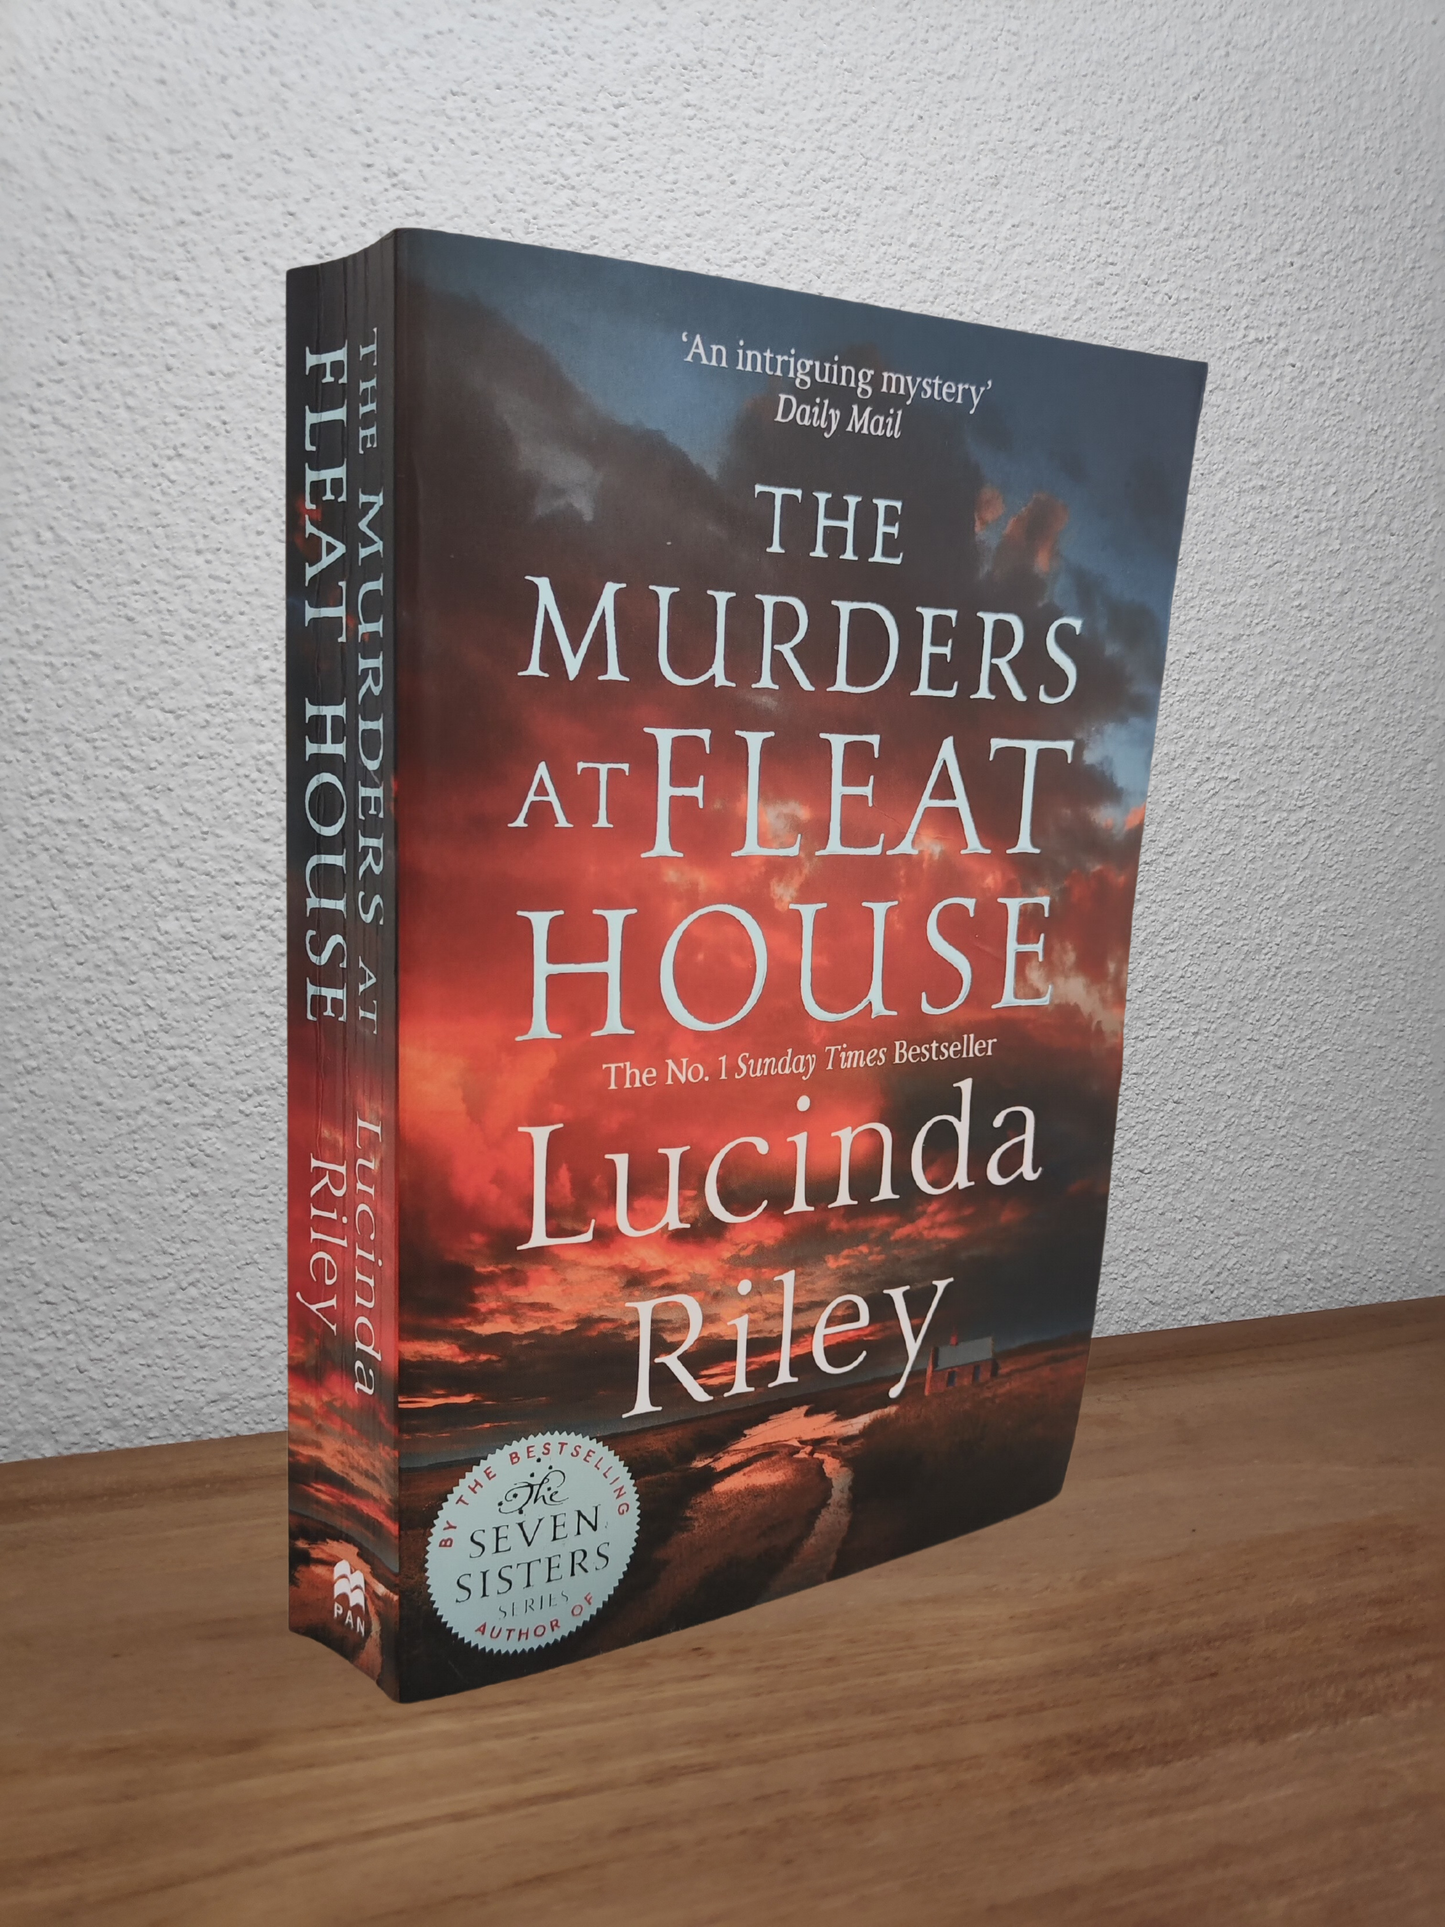 Lucinda Riley - The Murders at Fleat House